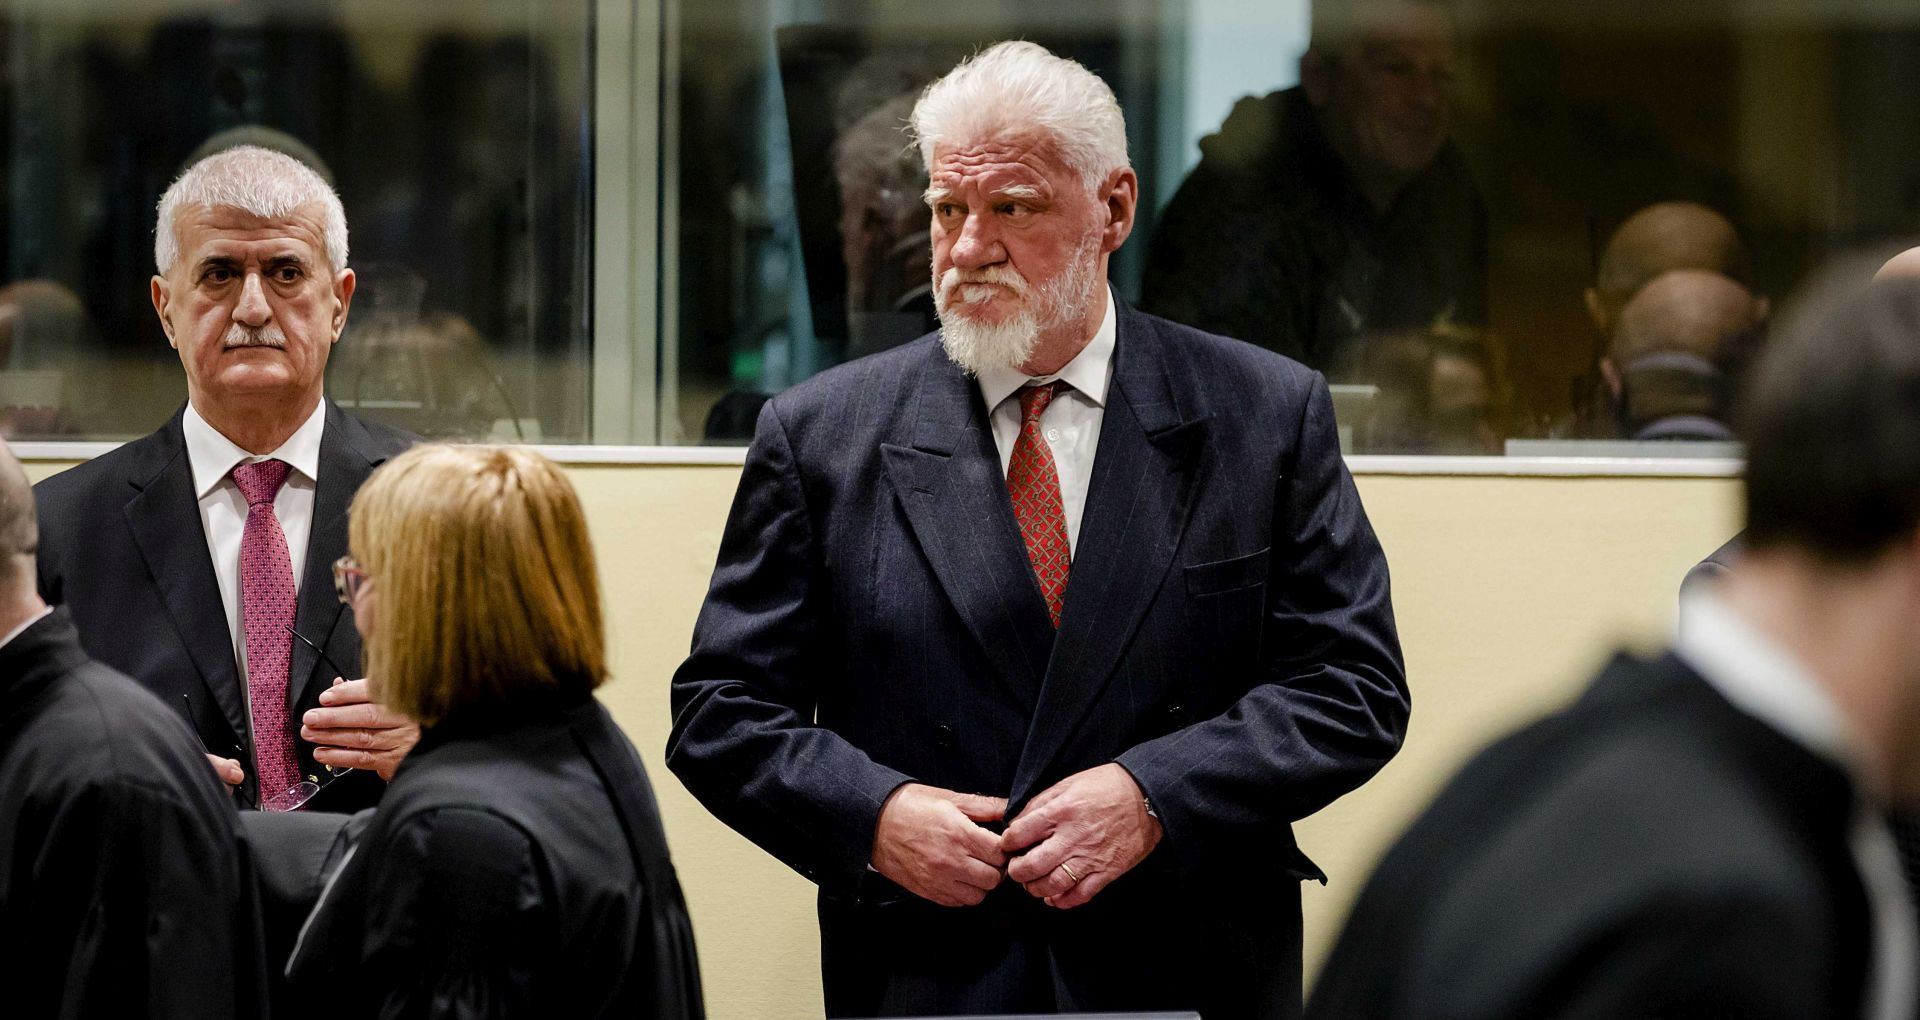 epa06357212 Bosnian Croat, Slobodan Praljak (C) enters the court in The Hague, The Netherlands, 29 November 2017, prior to the appeals judgement in the International Criminal Tribunal for the former Yugoslavia (ICTY), for war crimes committed during the bloody break-up of Yugoslavia.  EPA/ROBIN VAN LONKHUIJSEN / POOL